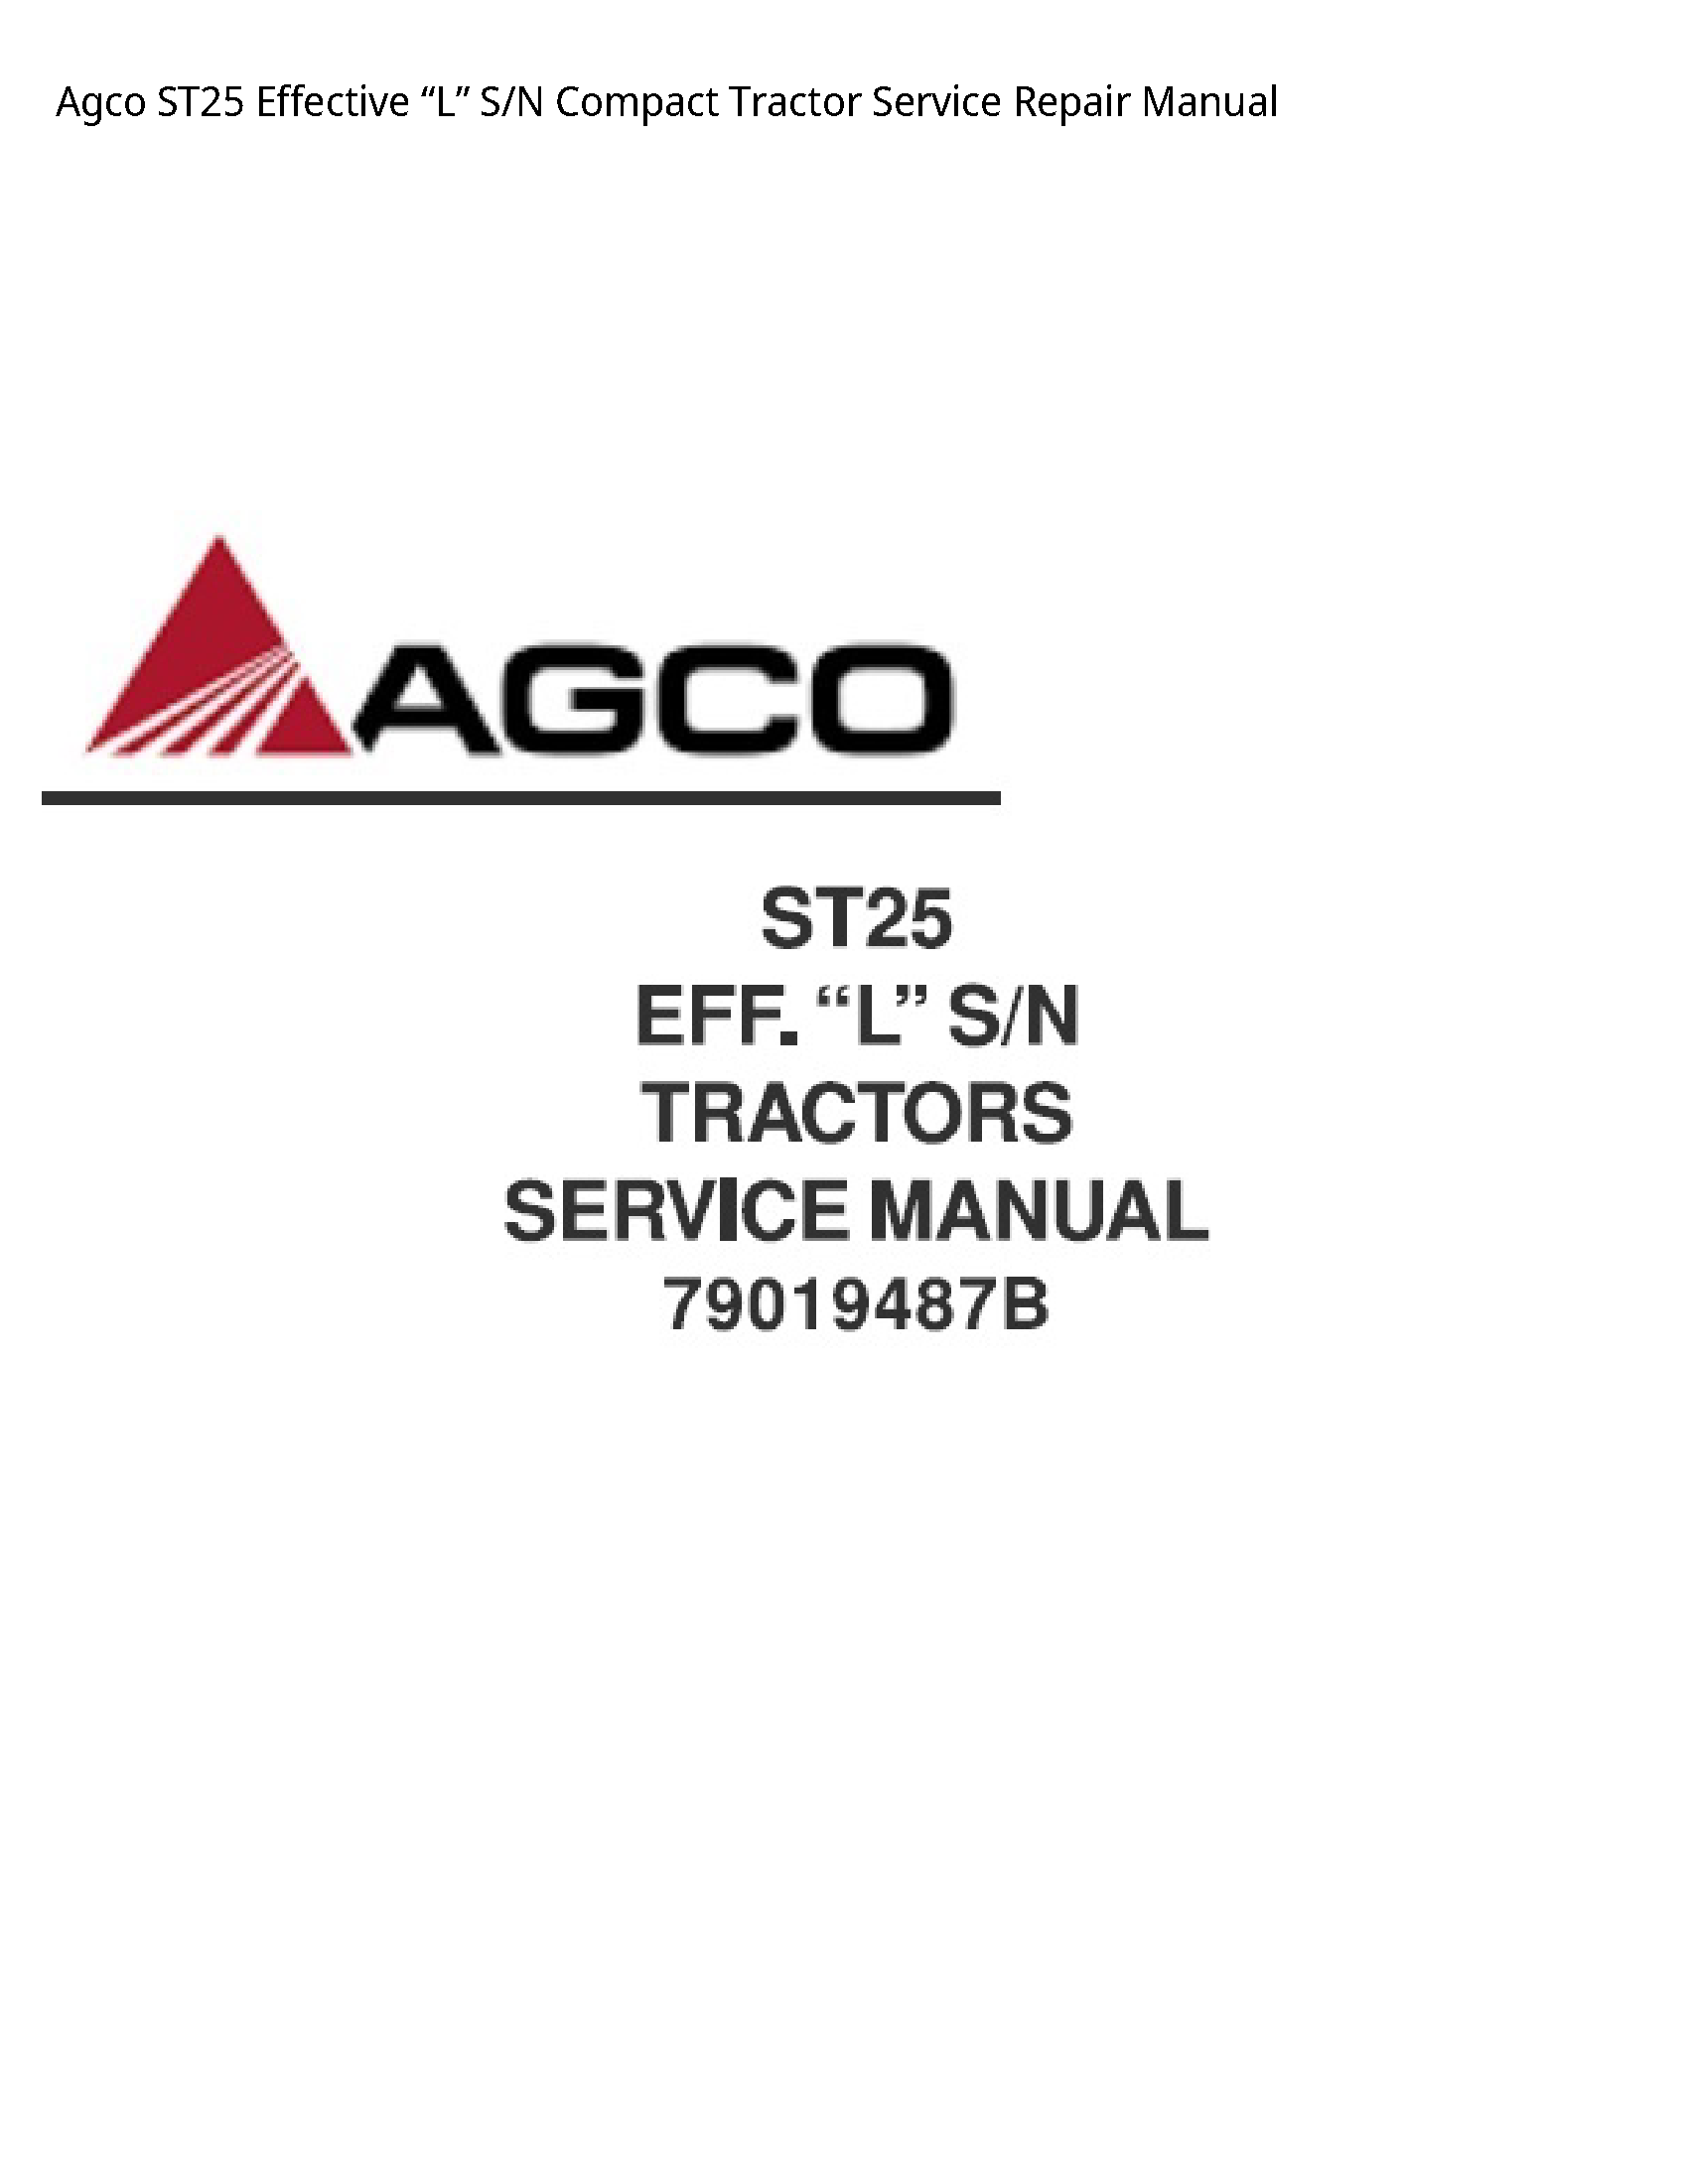 AGCO ST25 Effective “L” S/N Compact Tractor manual